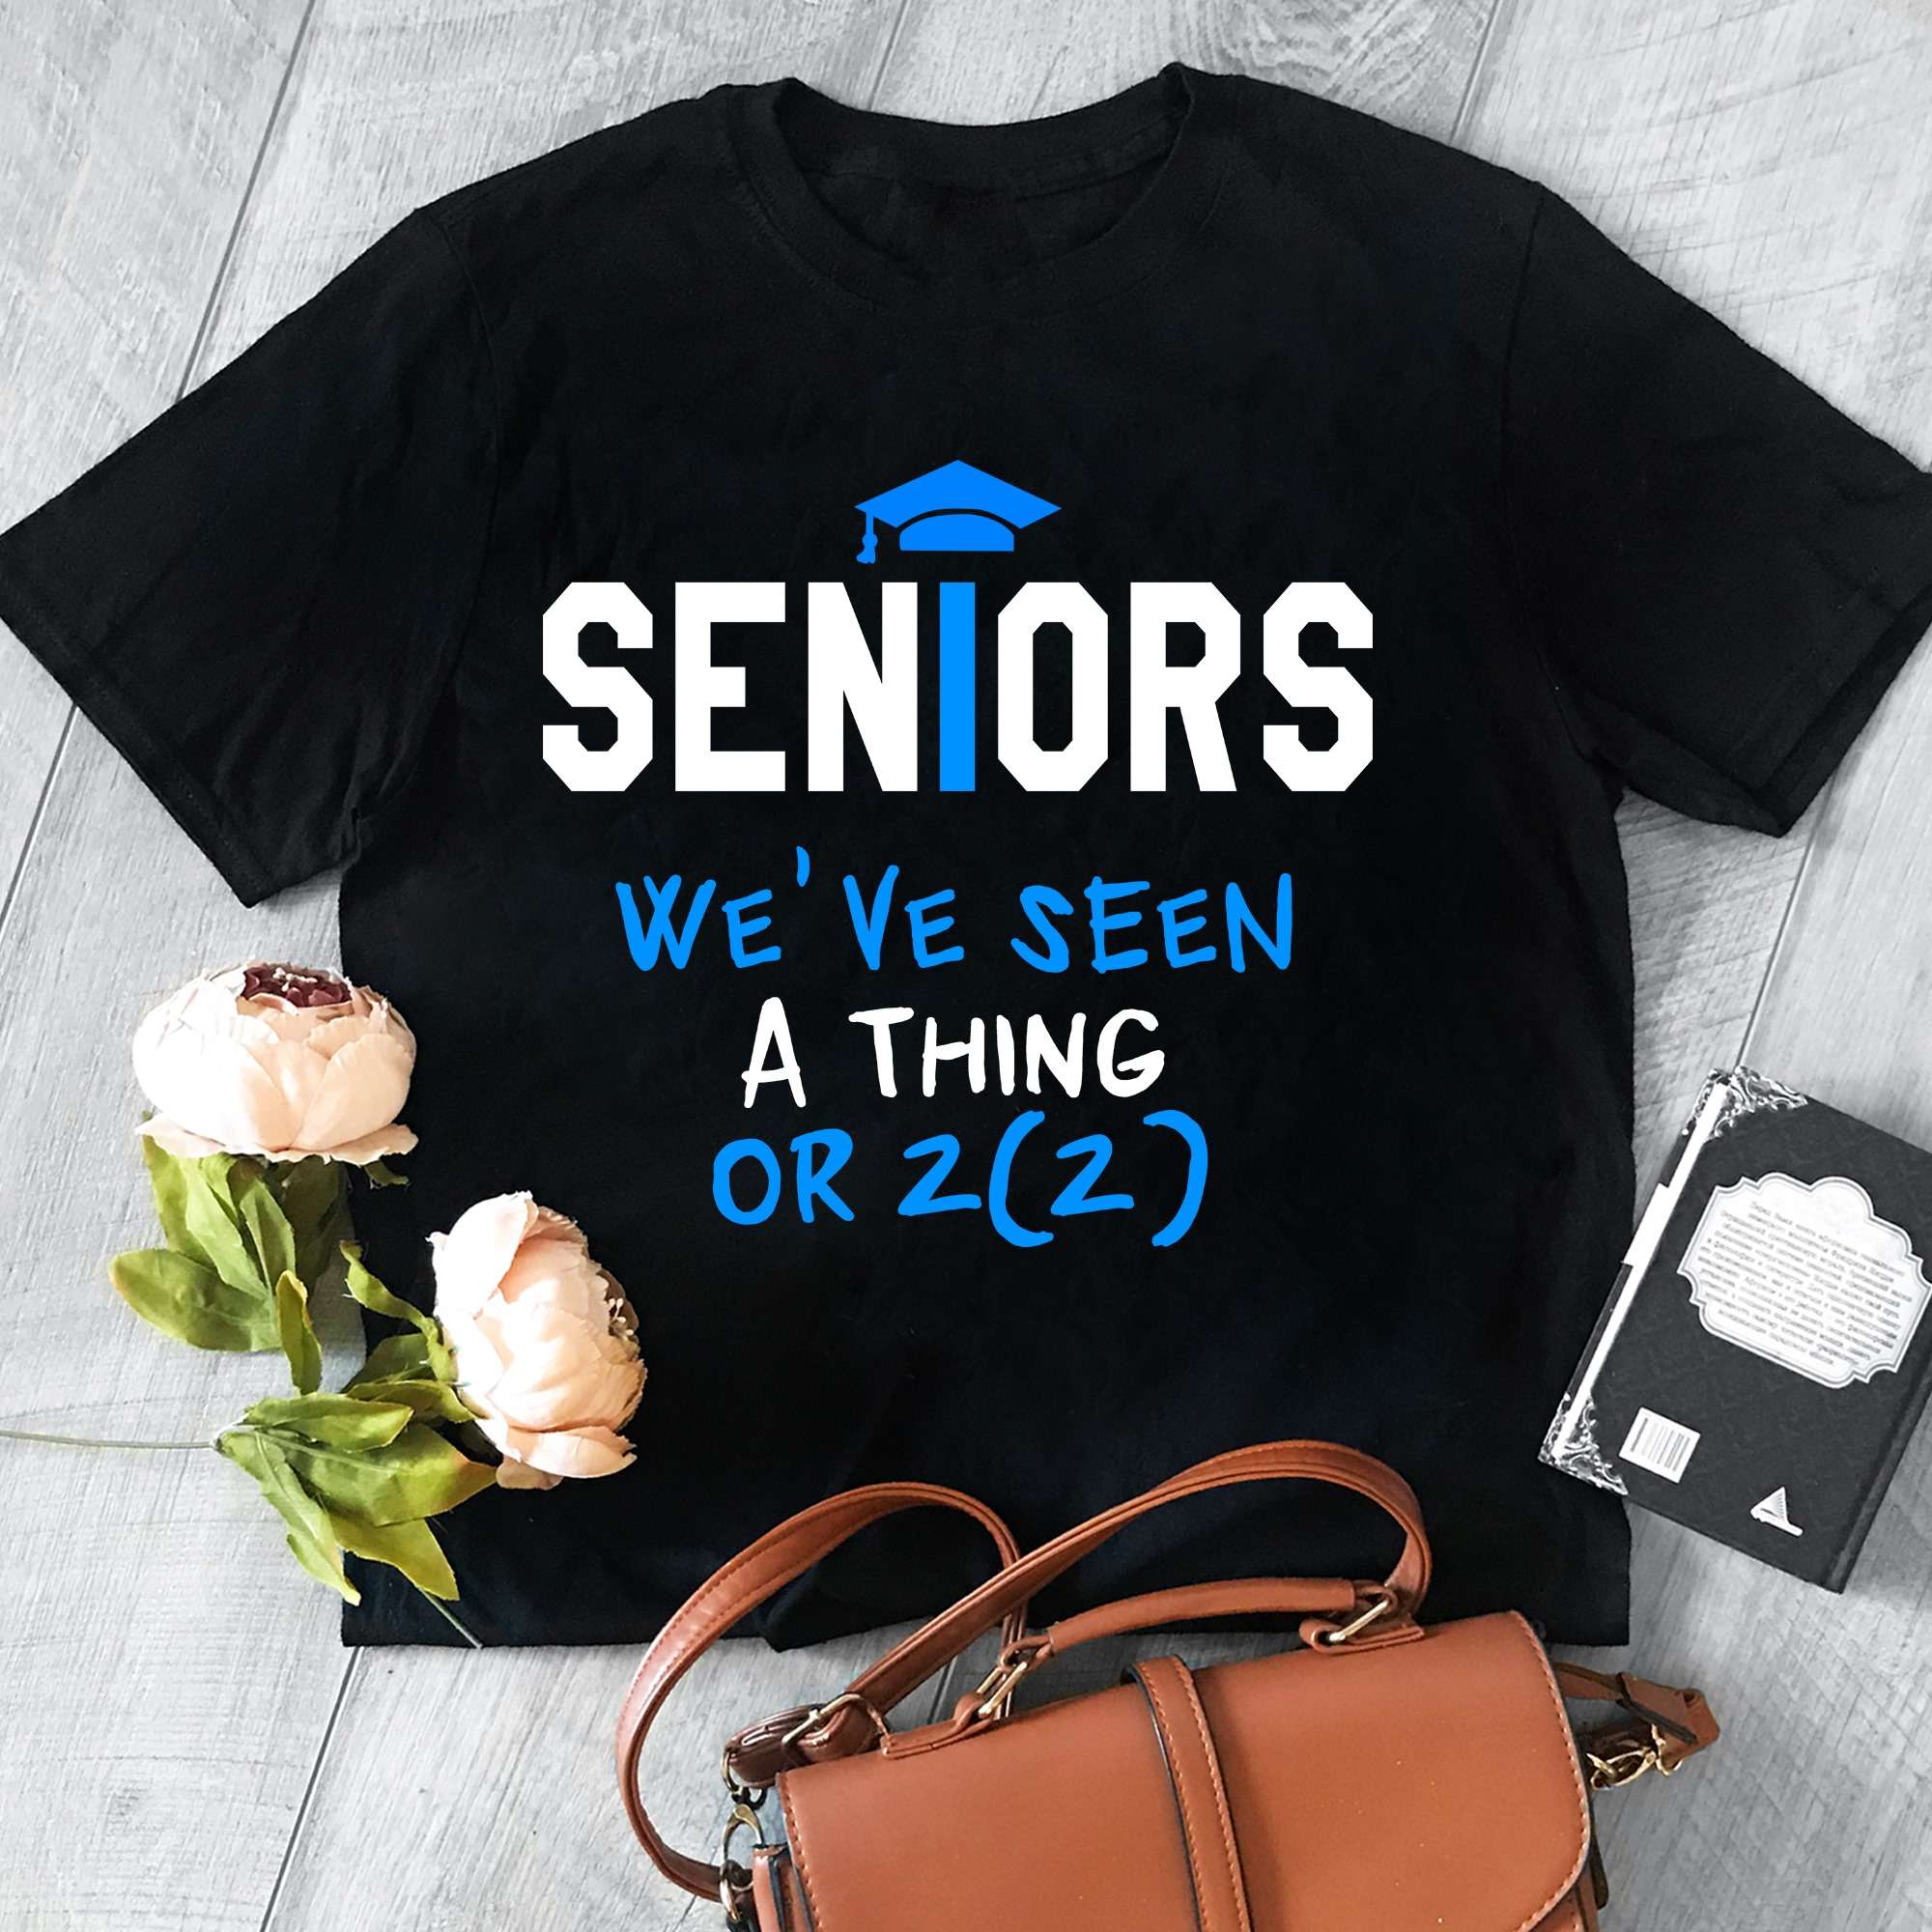 Seniors we've seen a thing or 2(2)